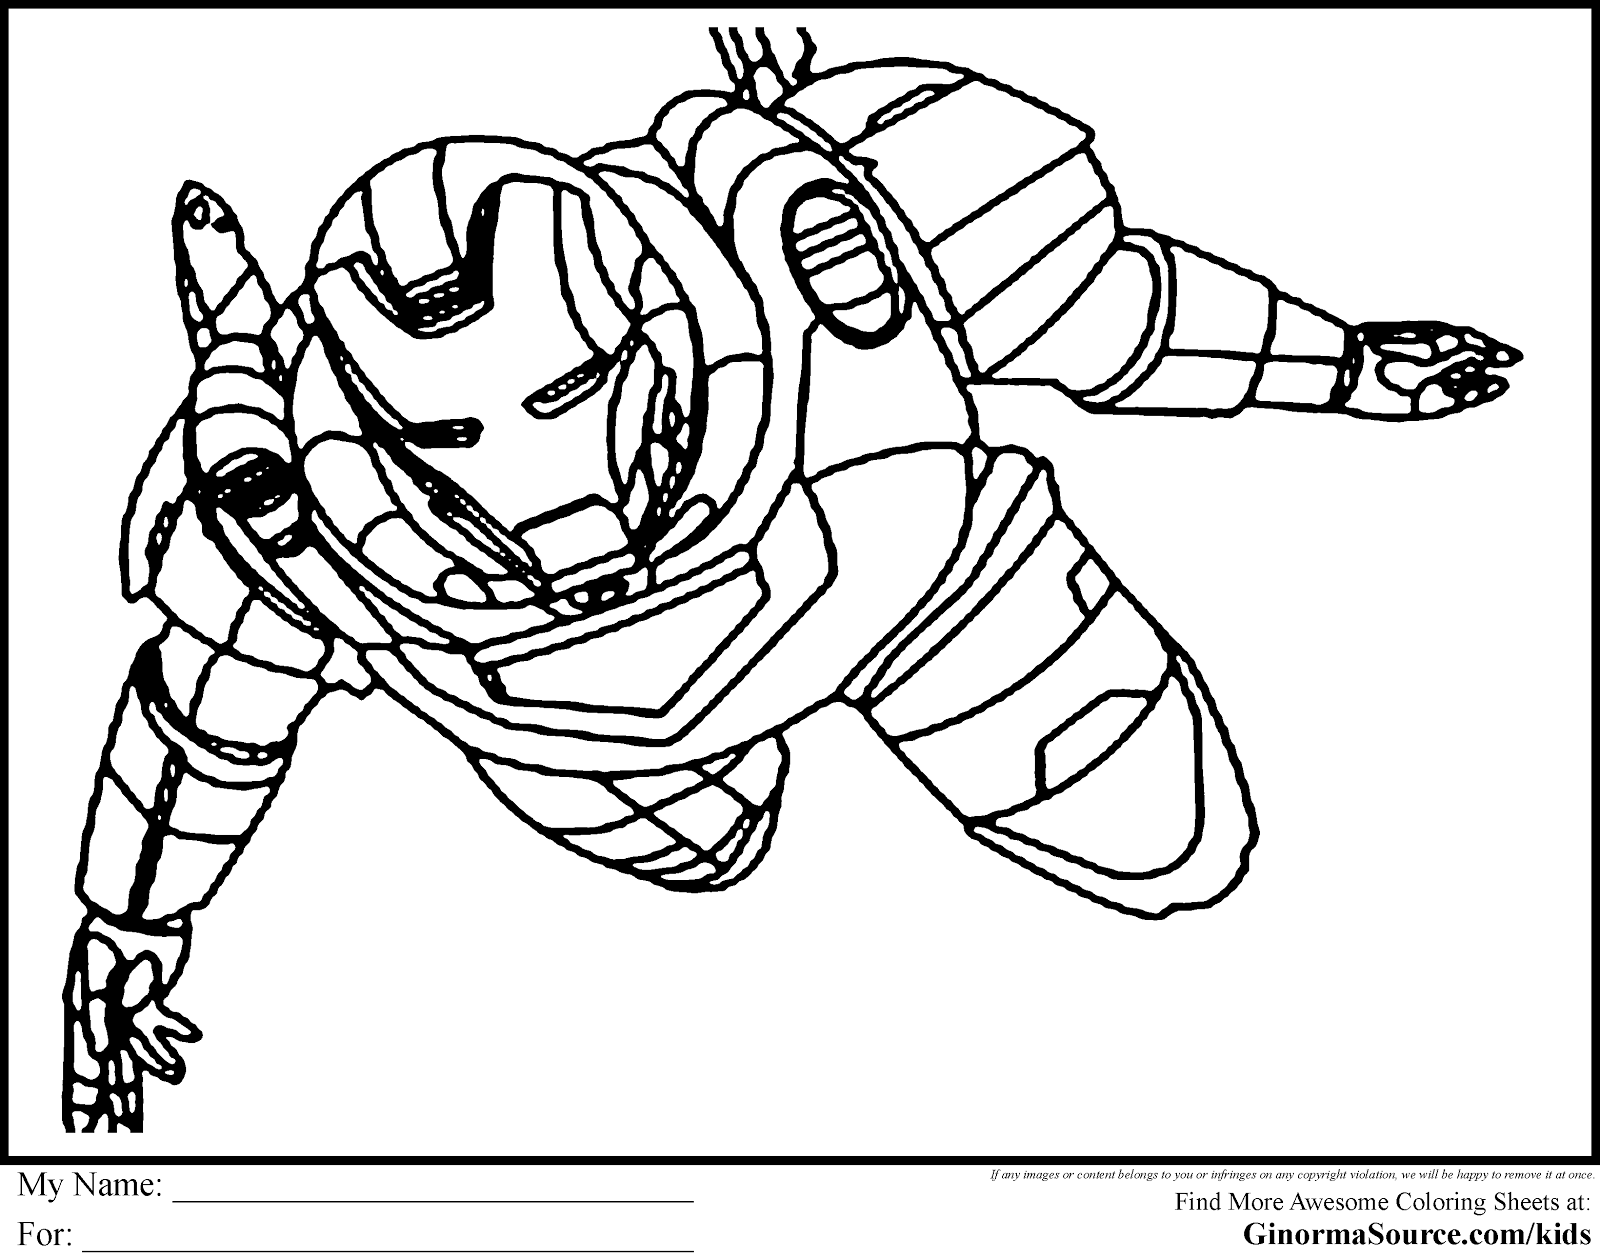 Superheroes coloring pages download and print for free